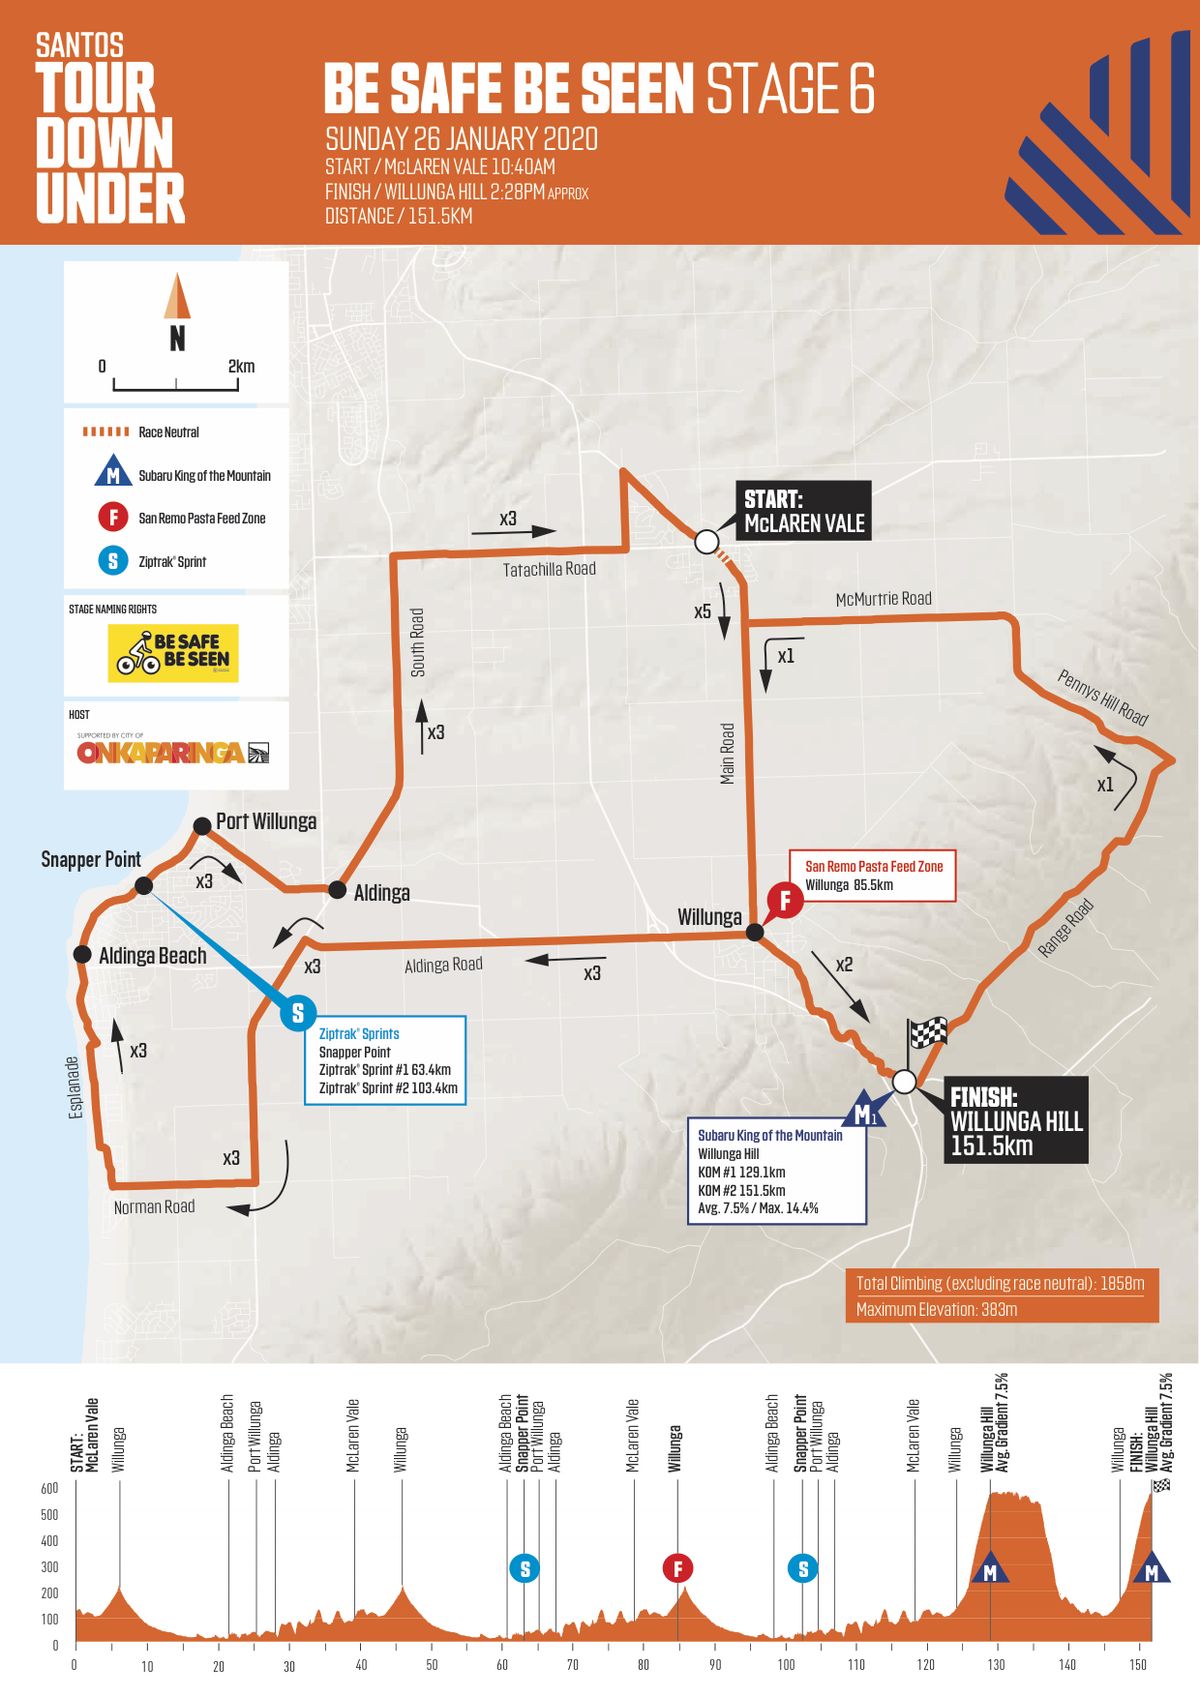 preview tour down under